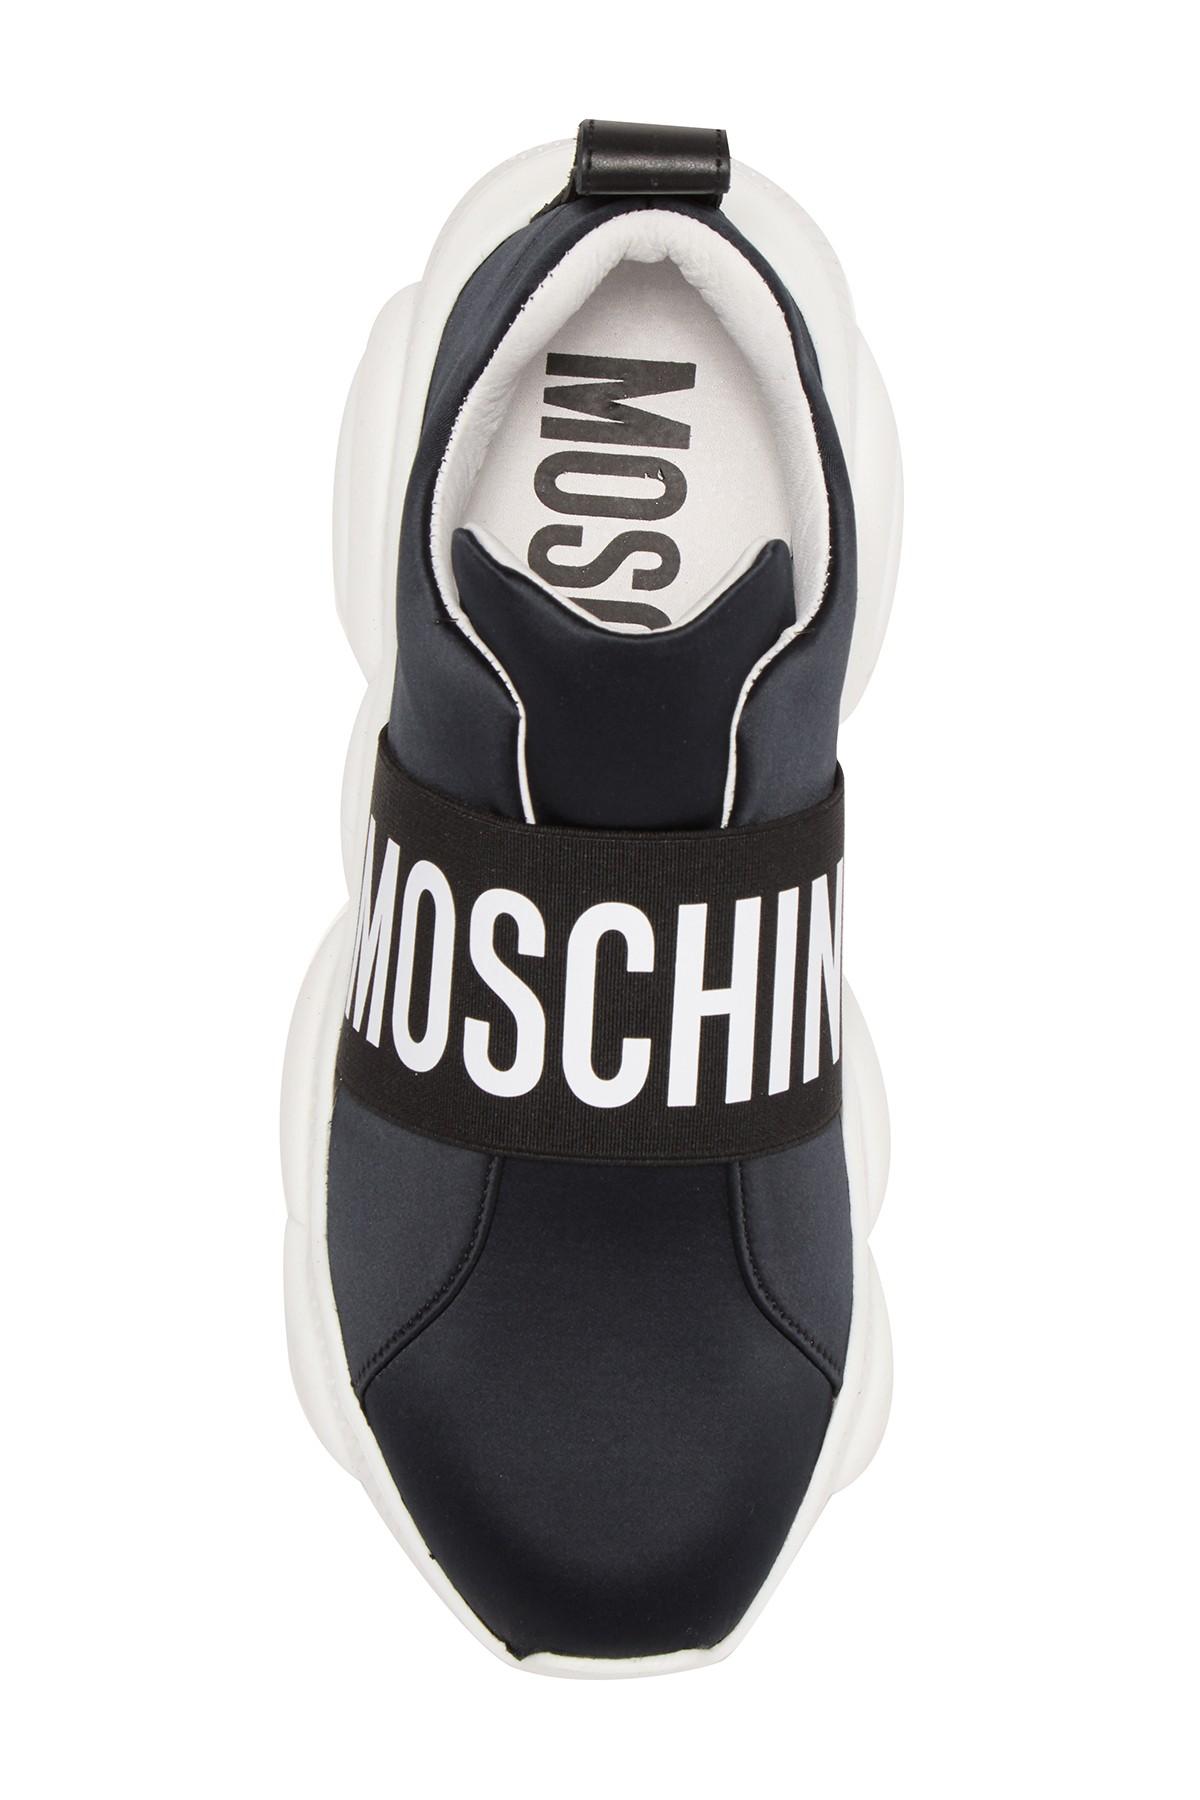 Moschino Logo Slip On Trainers in Black | Lyst